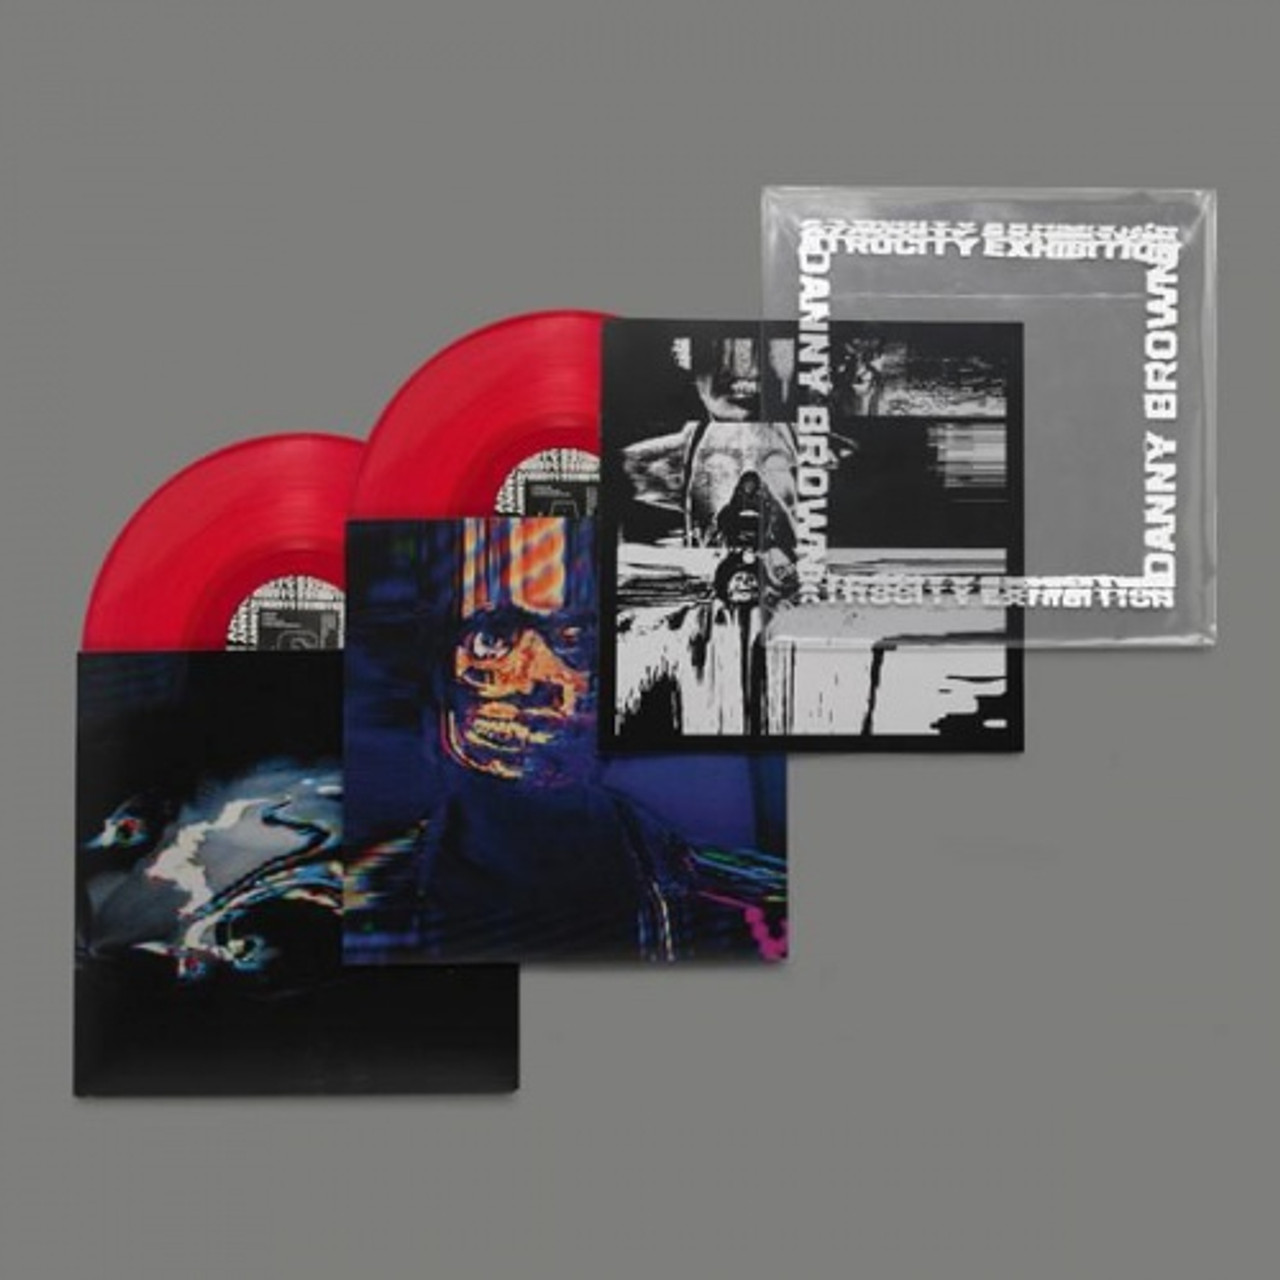 Danny Brown - Atrocity Exhibition - 2x Colored Vinyl - Ear Candy Music